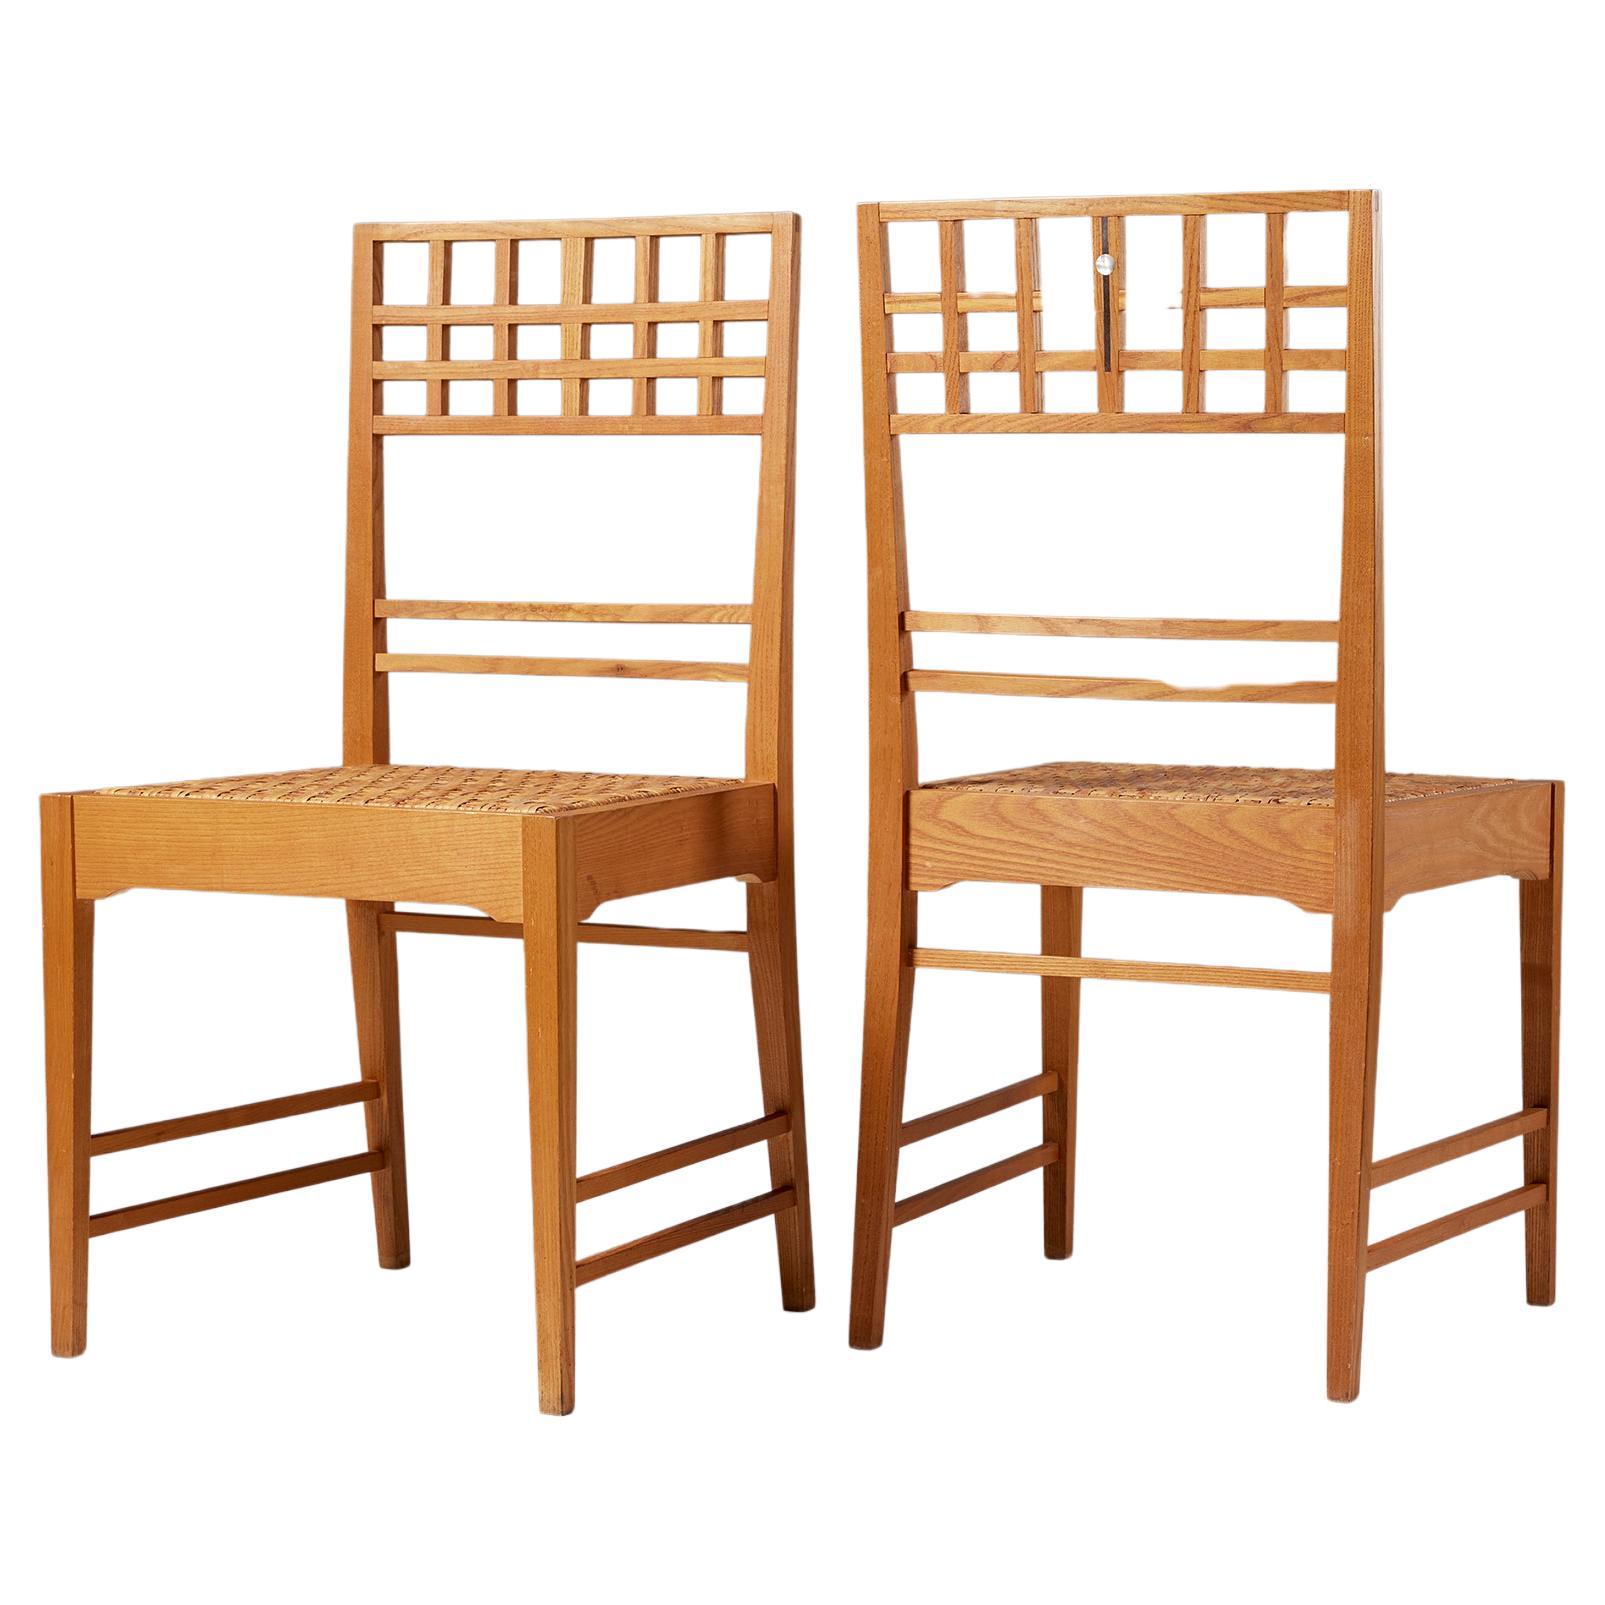 Pair of chairs attributed to Erik Chambert, Sweden, 1950s, mother of pearl inlay